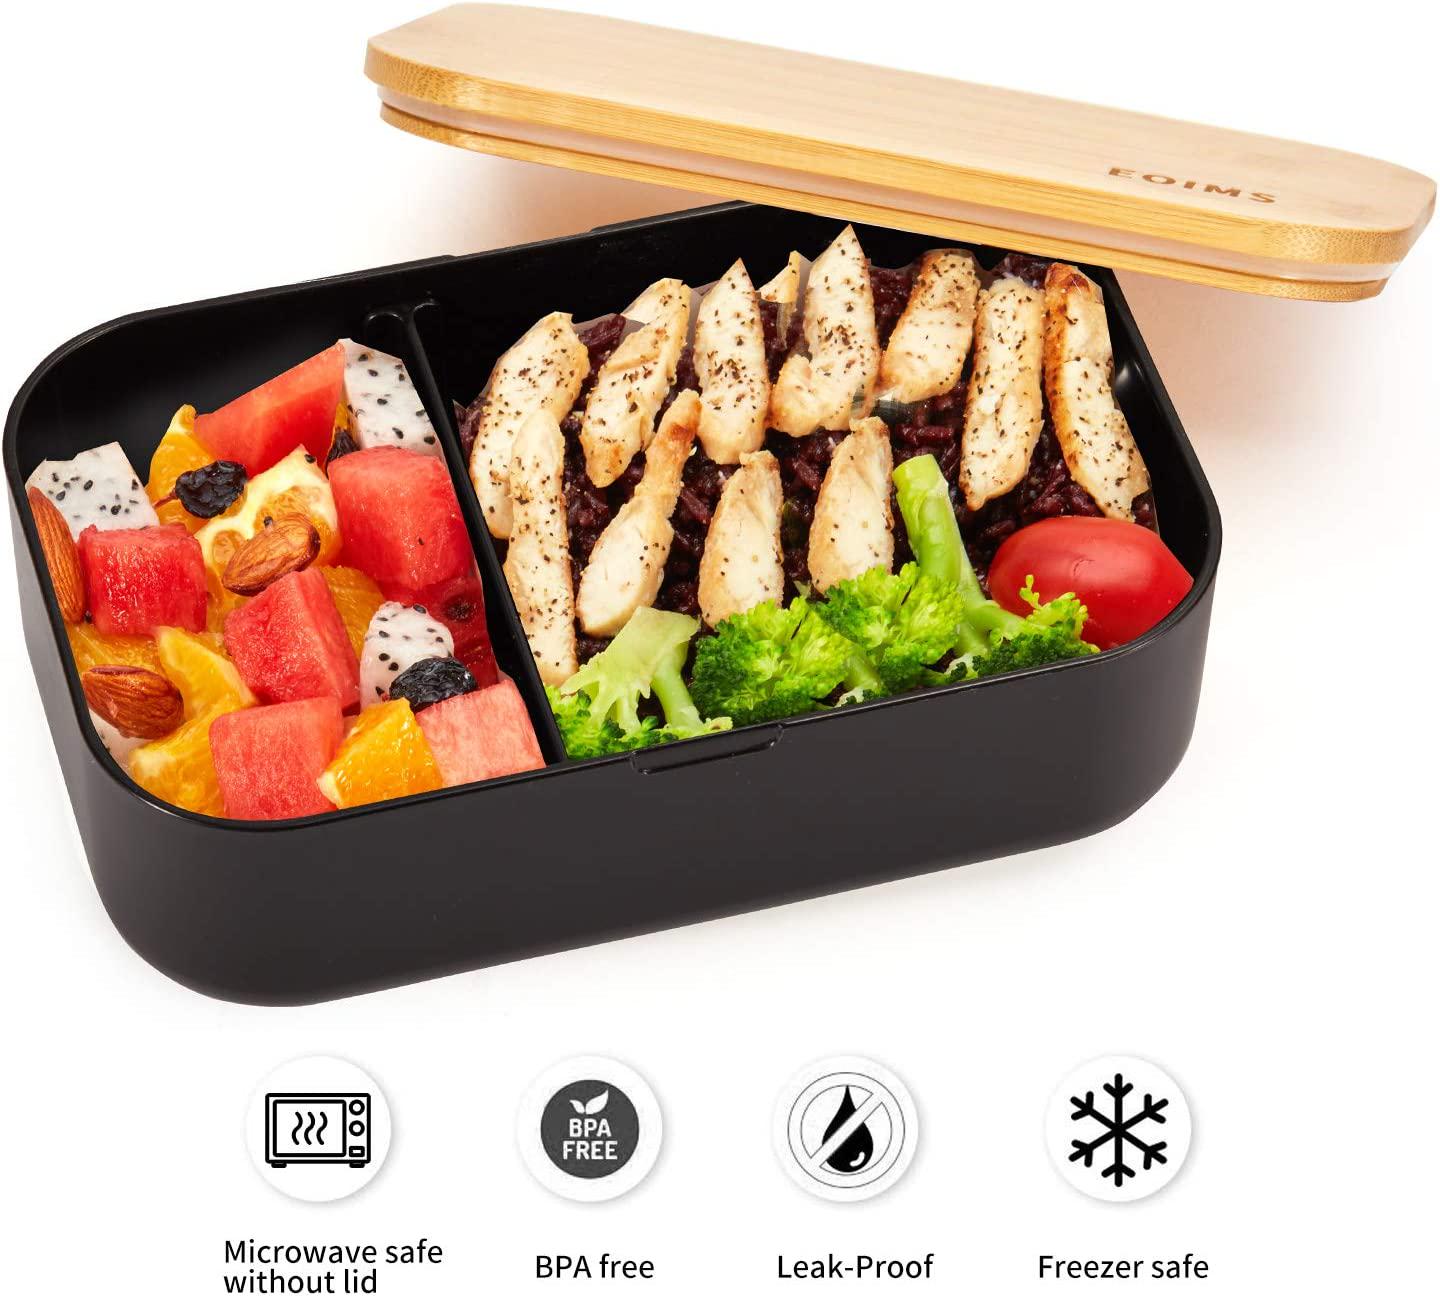 EOIMS, EOIMS Original Design Bento Lunch Box for Adults/Kids,Leak-Proof Japanese Bamboo Lunch Box with Divider,Microwave and Dishwasher Safe, BPA-Free Black